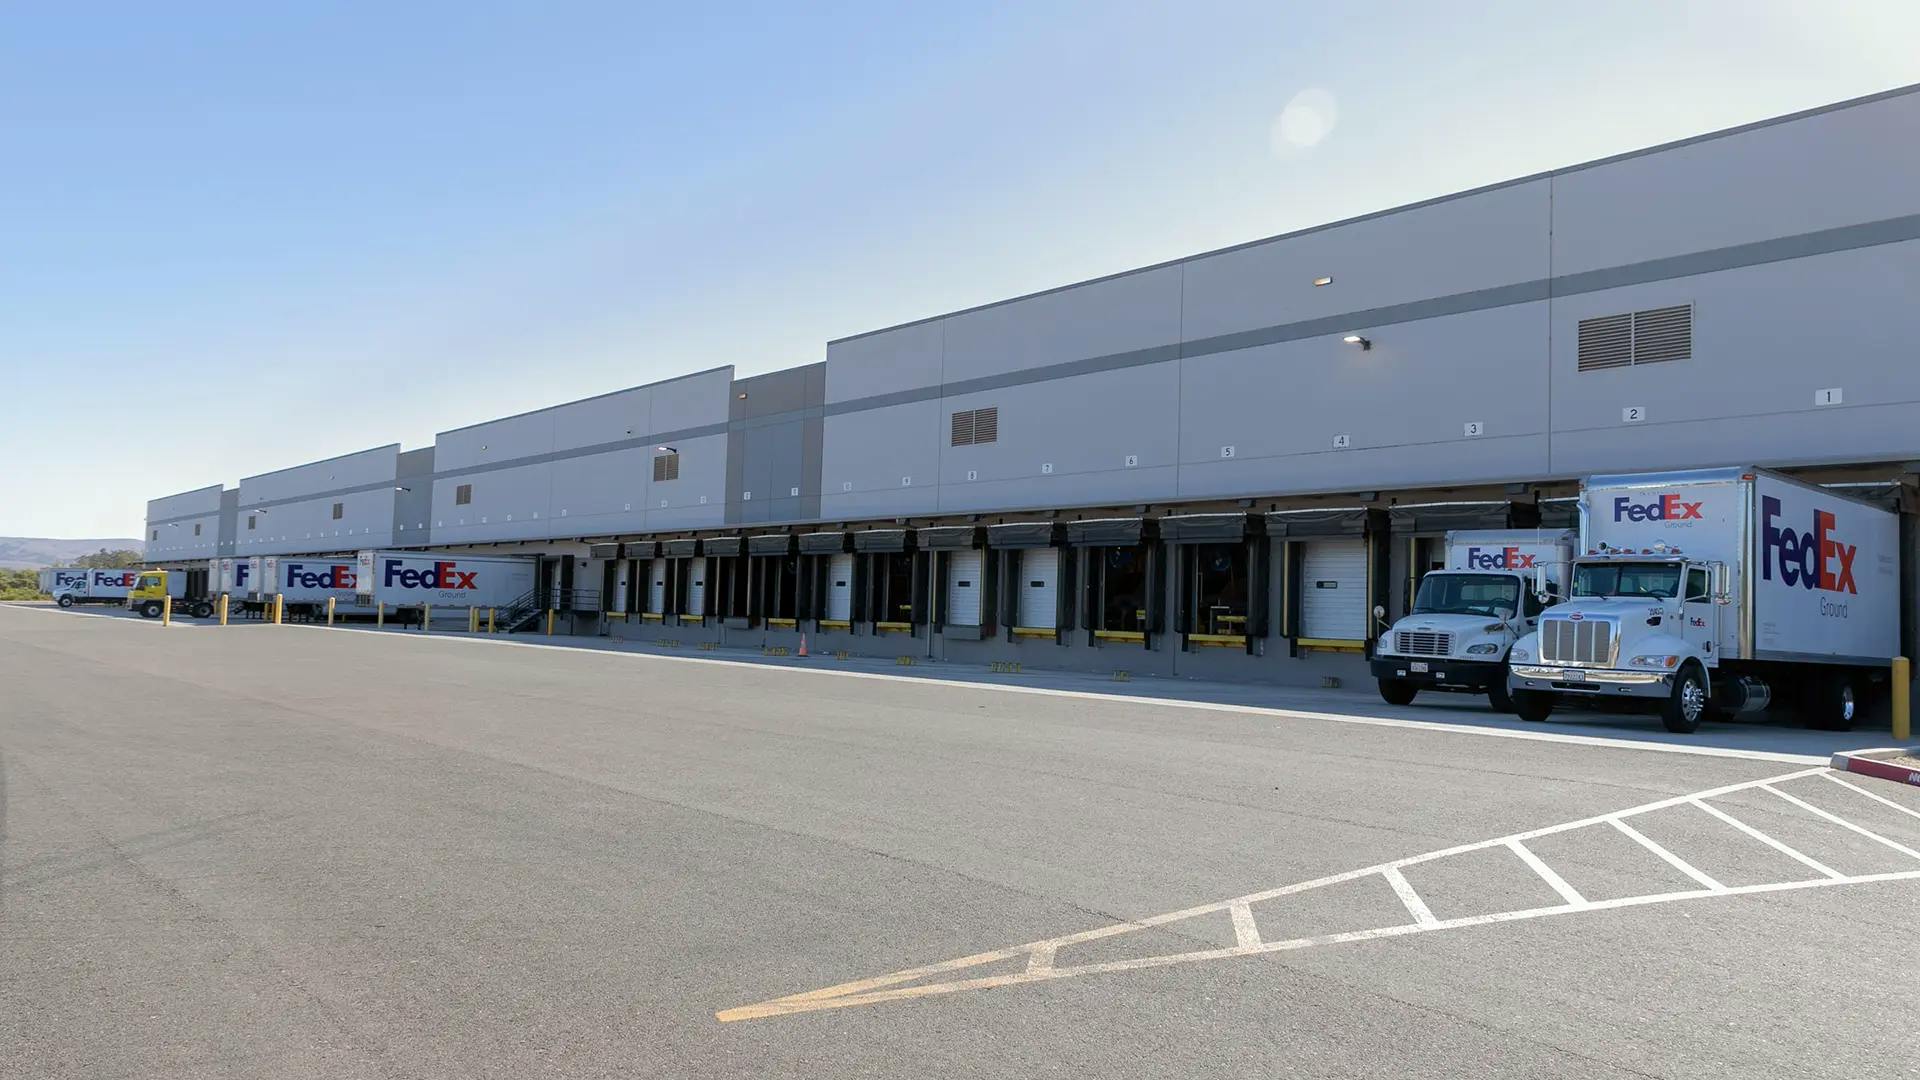 Large warehouse facility in Bakersfield, CA